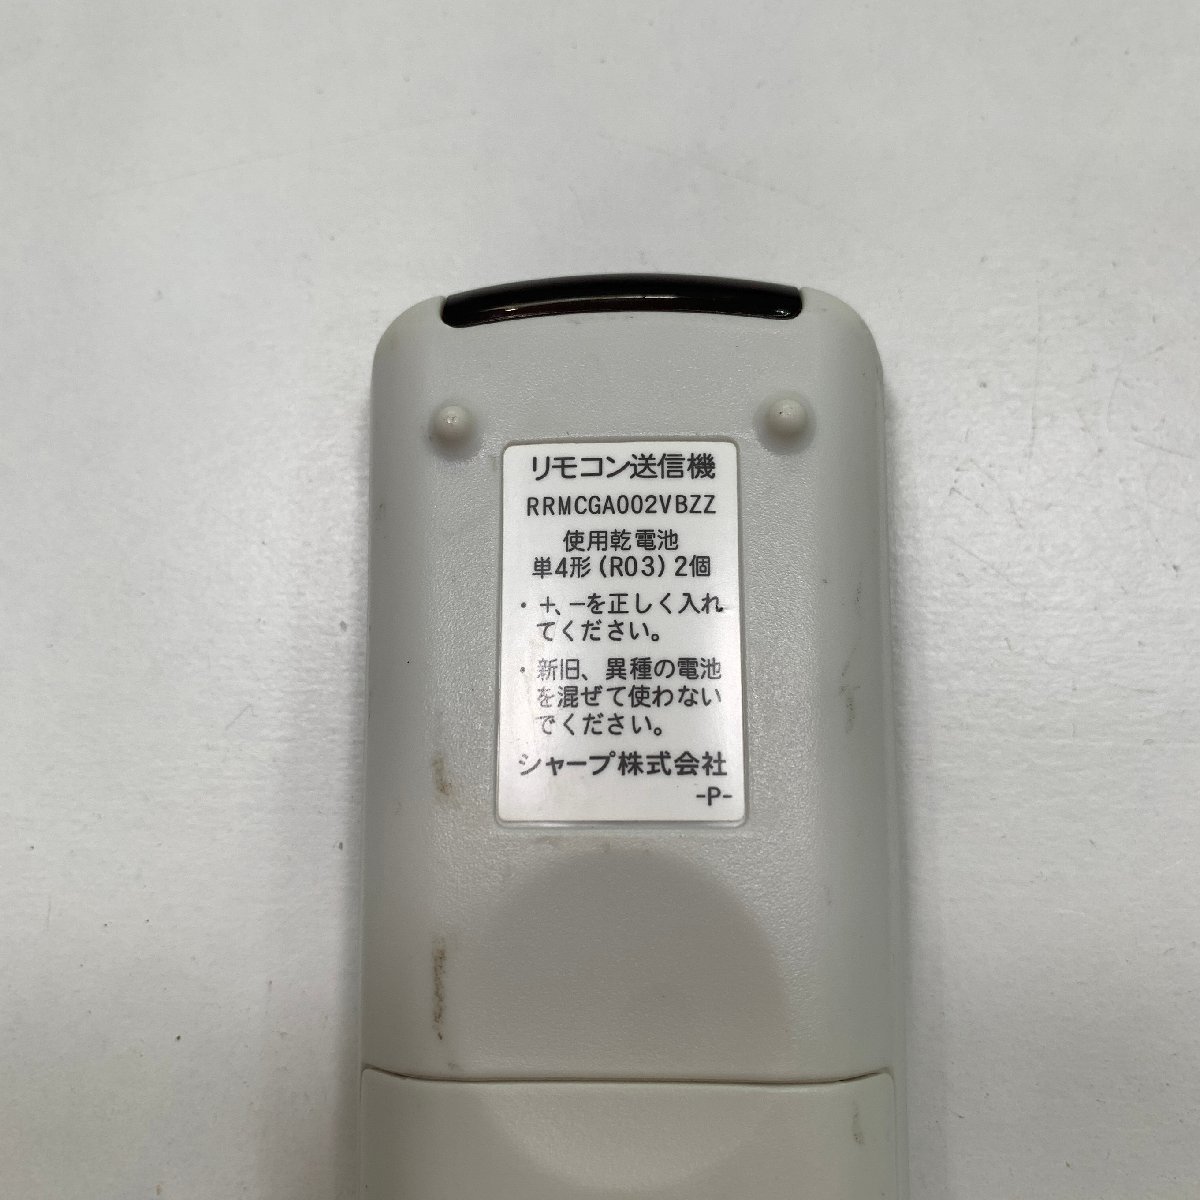 C1D666 [ postage 185 jpy ] remote control / SHARP sharp RRMCGA002VBZZ operation verification ending * immediately shipping *